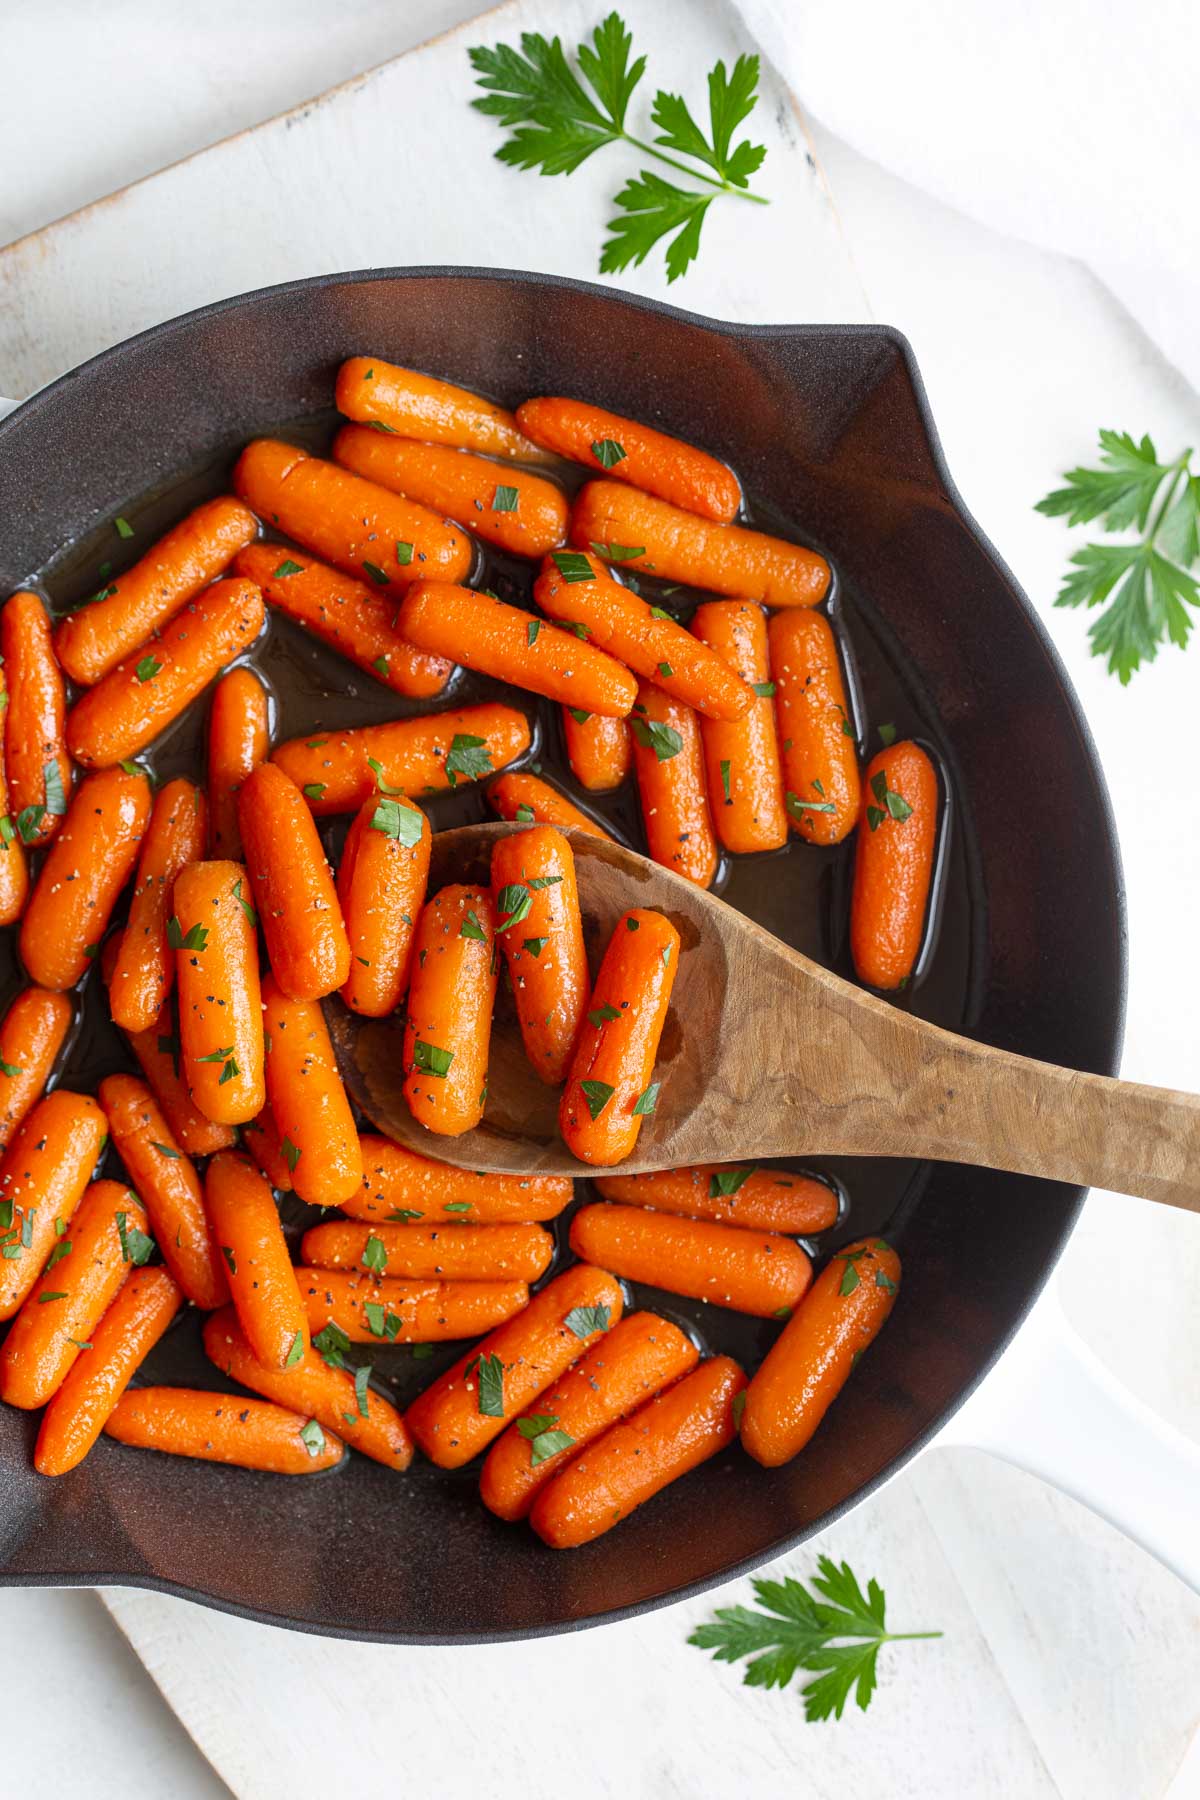 Overhead view of maple glazed carrots in a skillet with a wooden spoon.